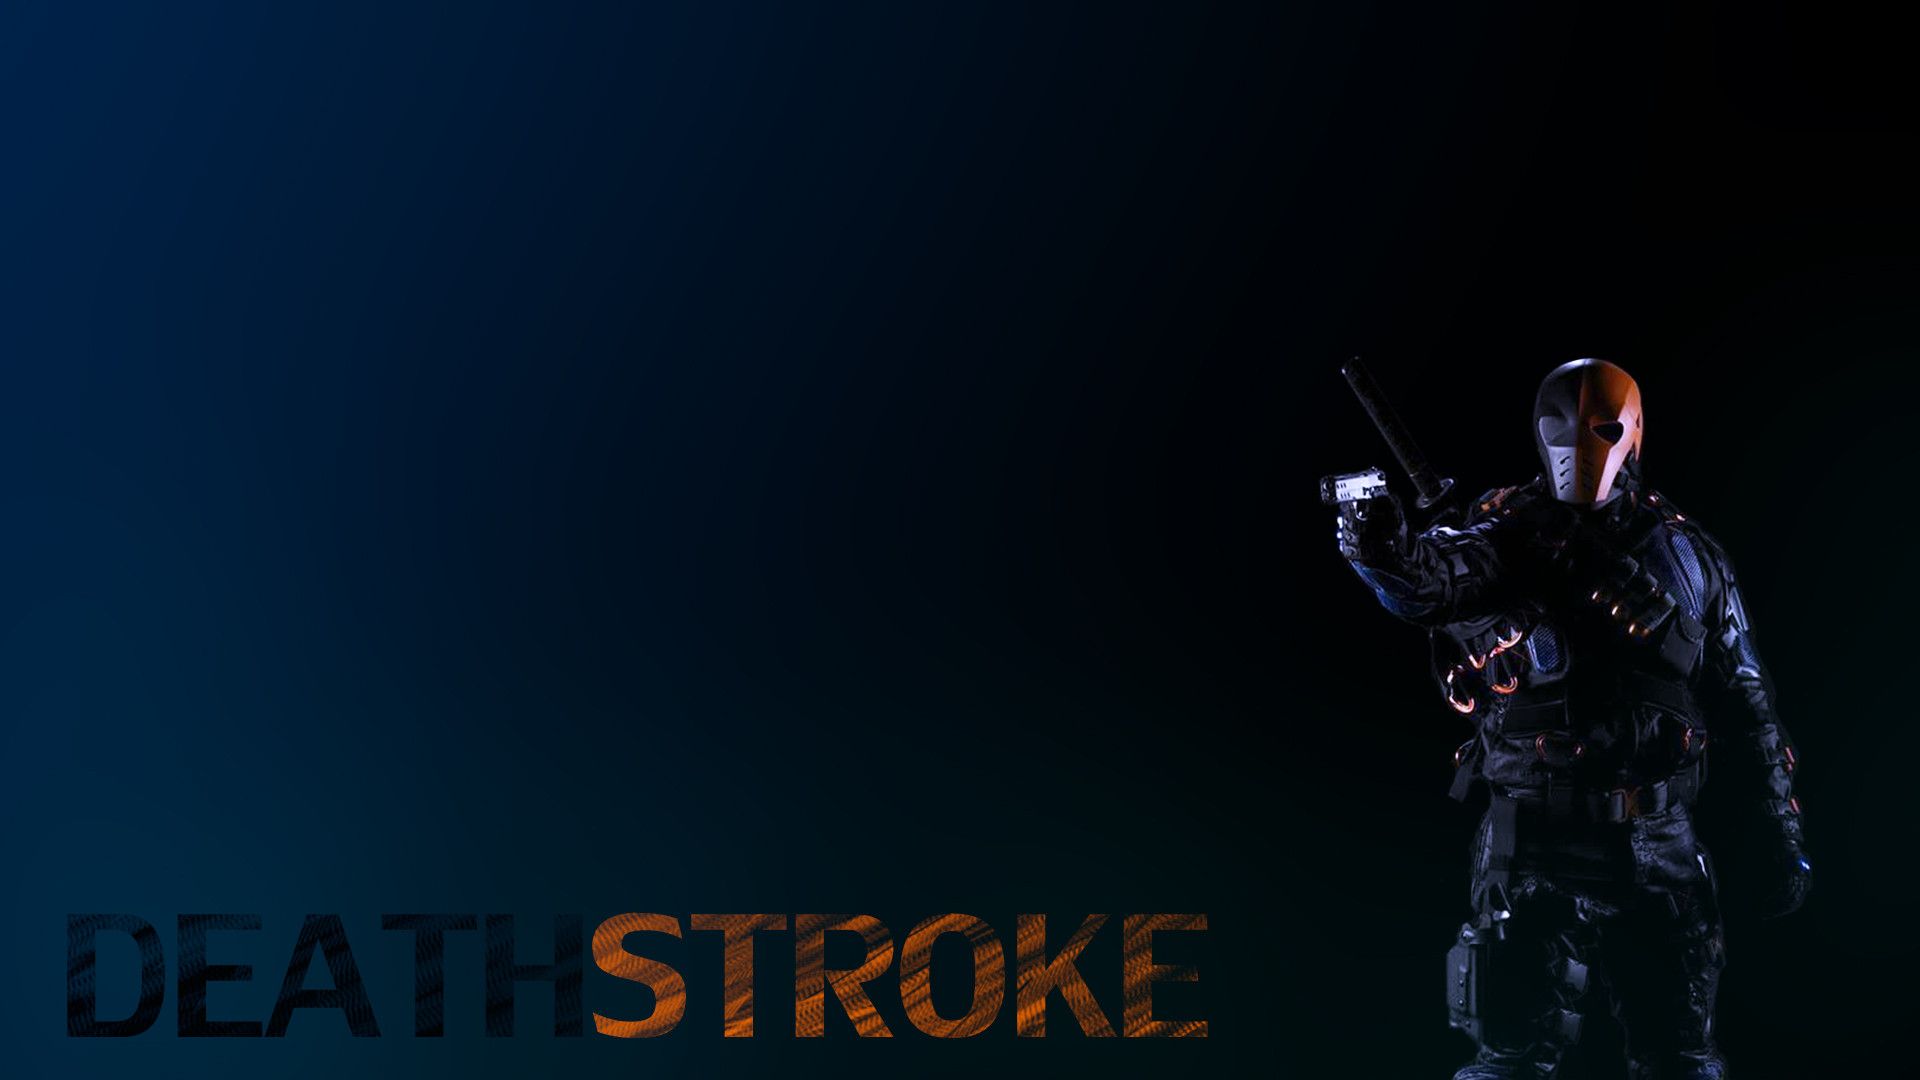 Made a wallpaper from the picture of Deathstroke, requests are